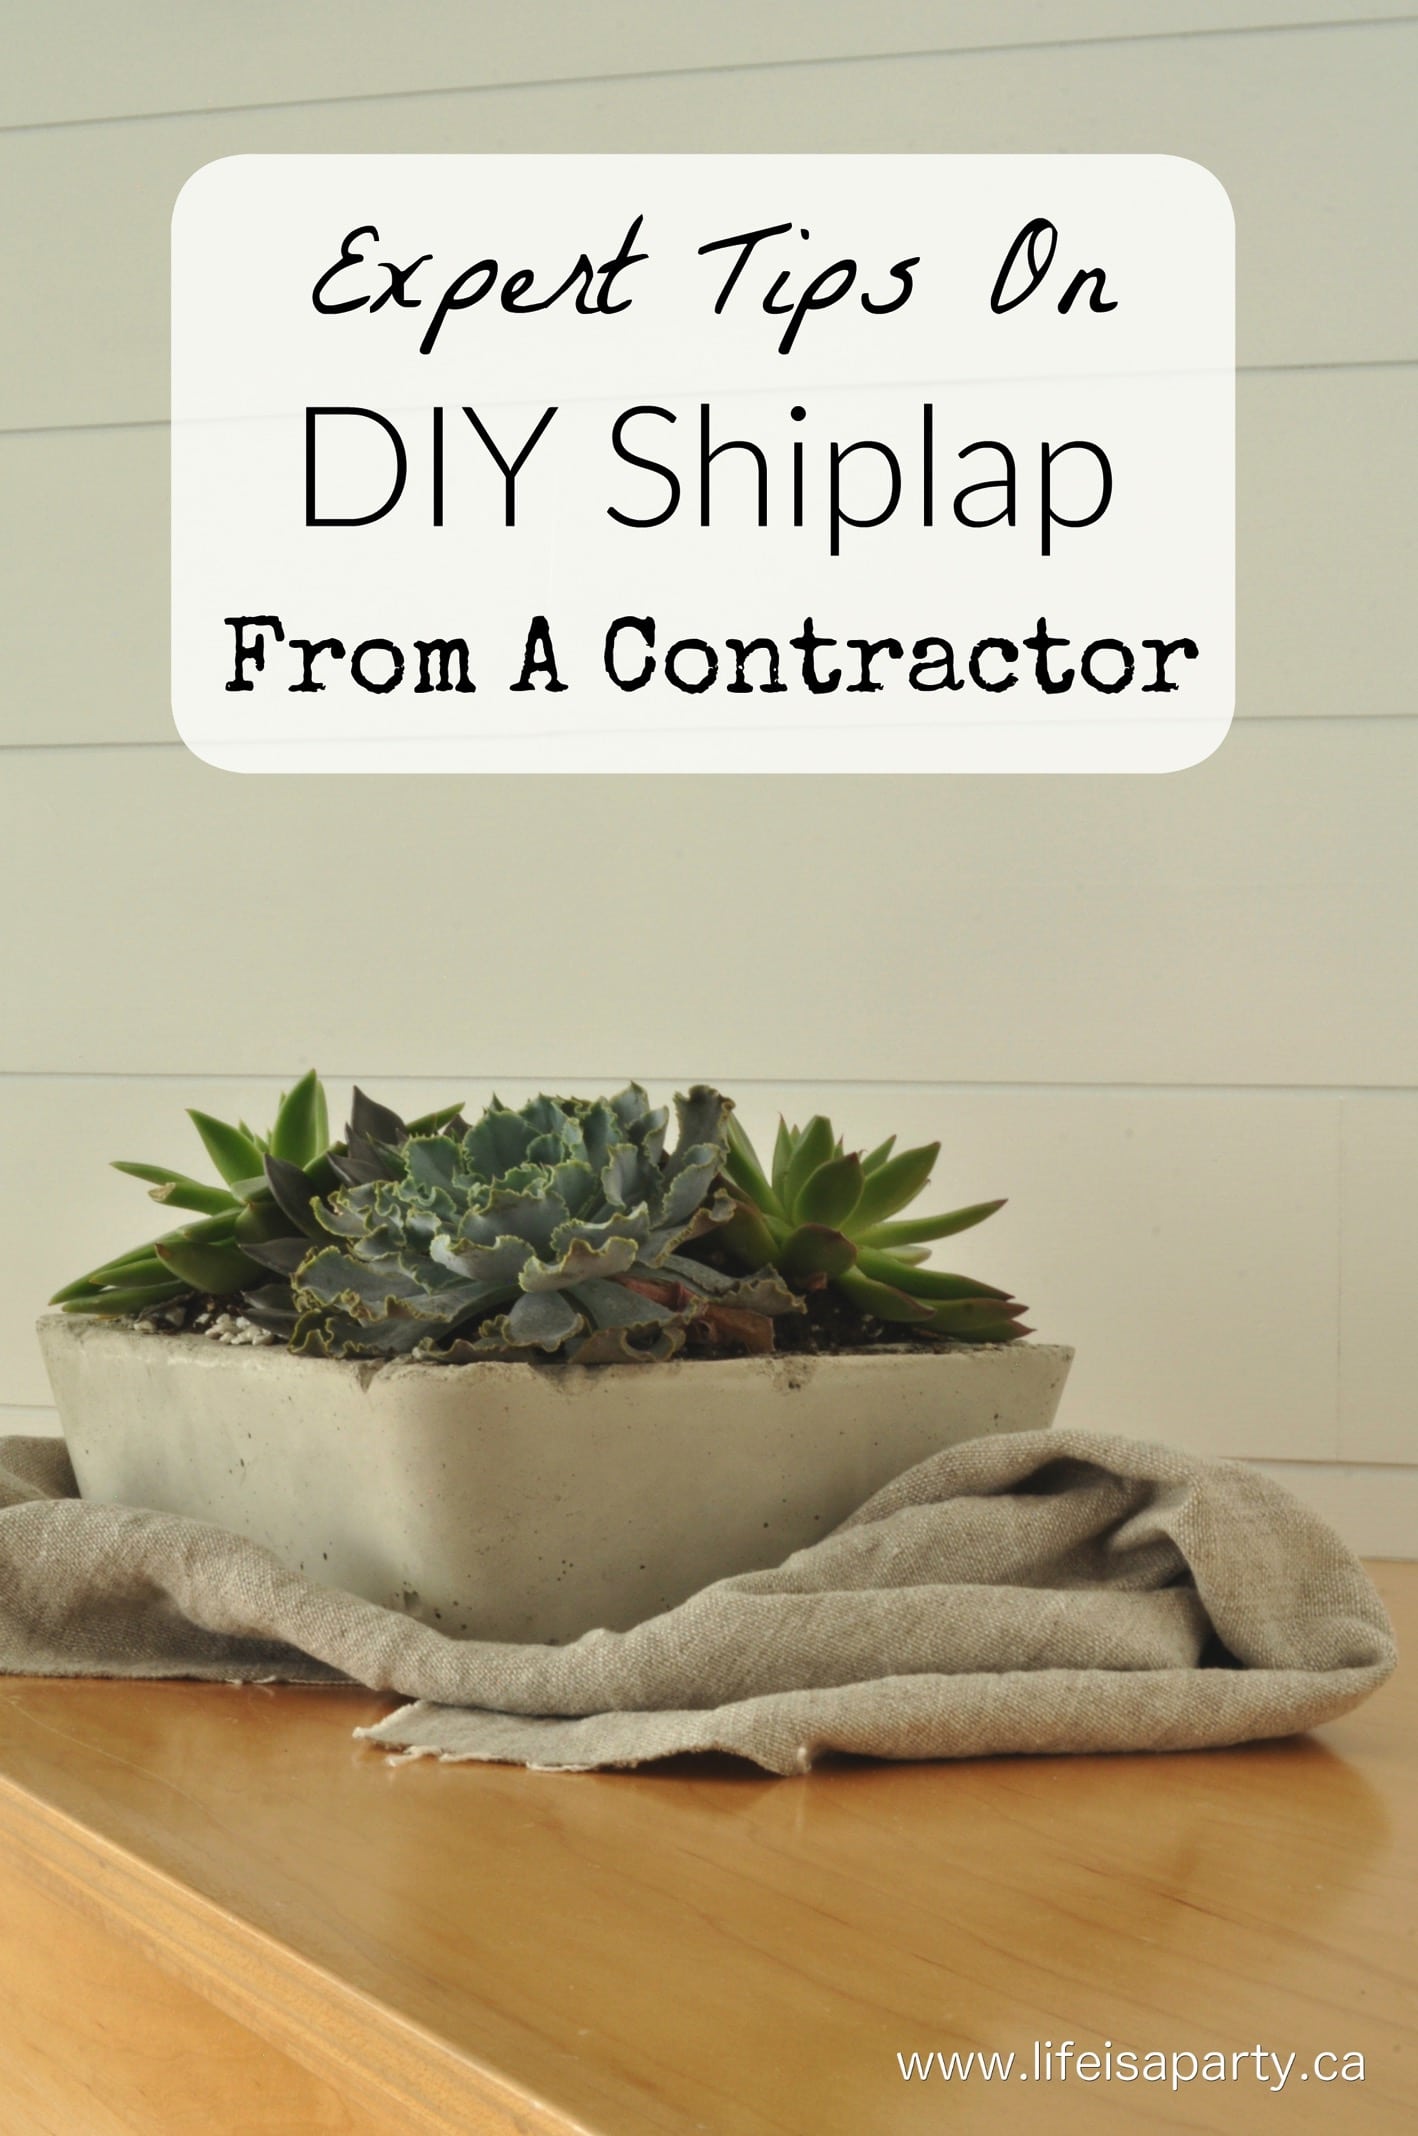 Expert Tips on DIY Shiplap from a Contractor